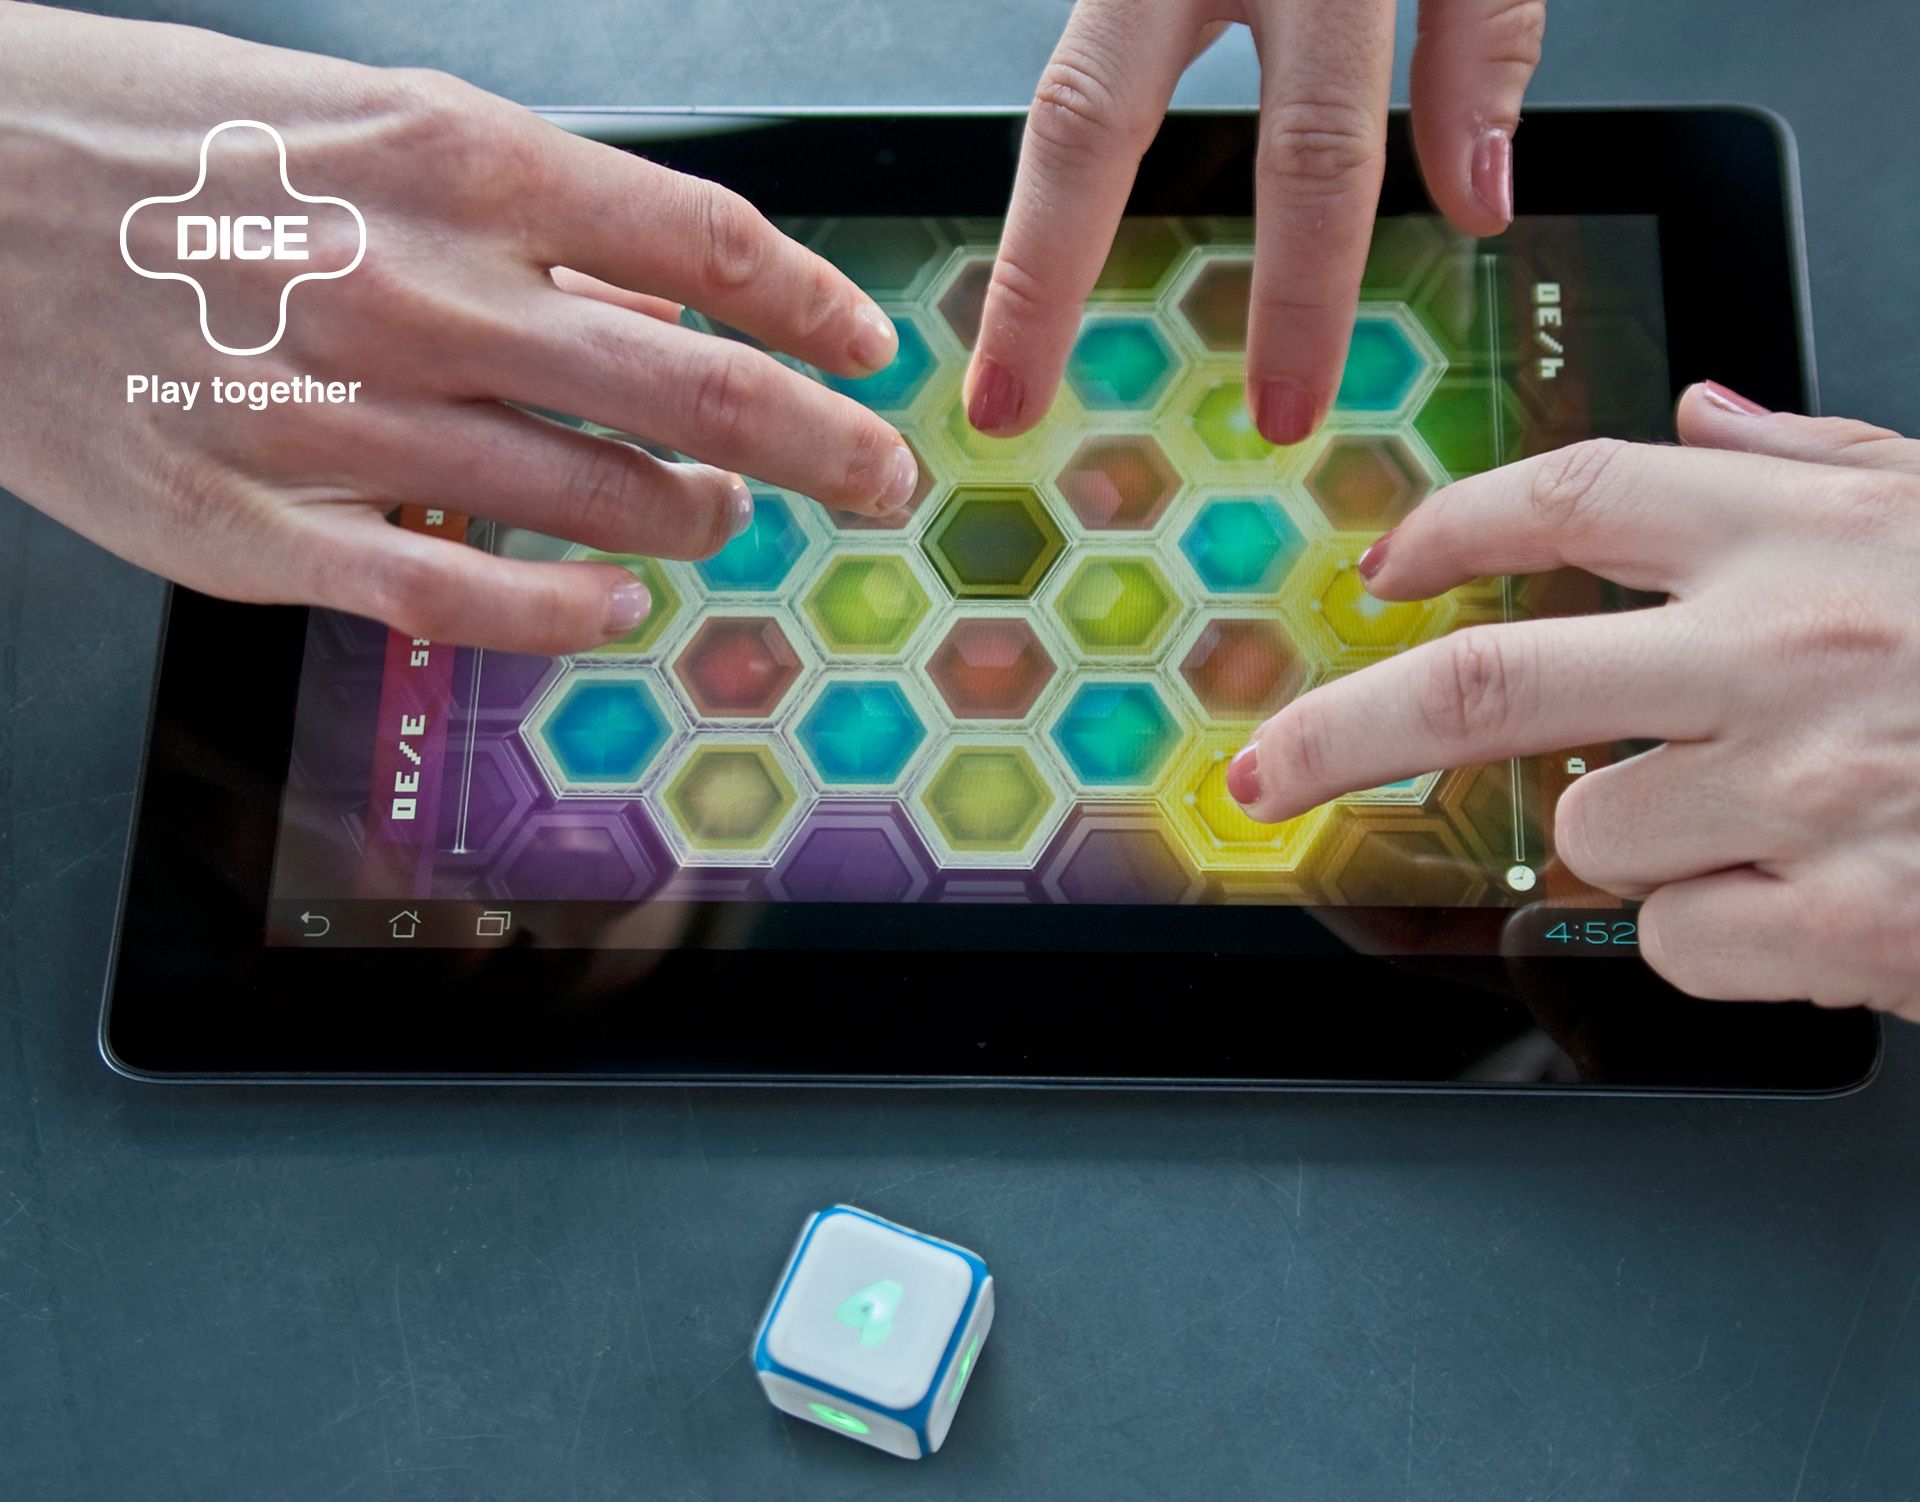 dice bluetooth gaming dice now available for ipad and android devices image 1